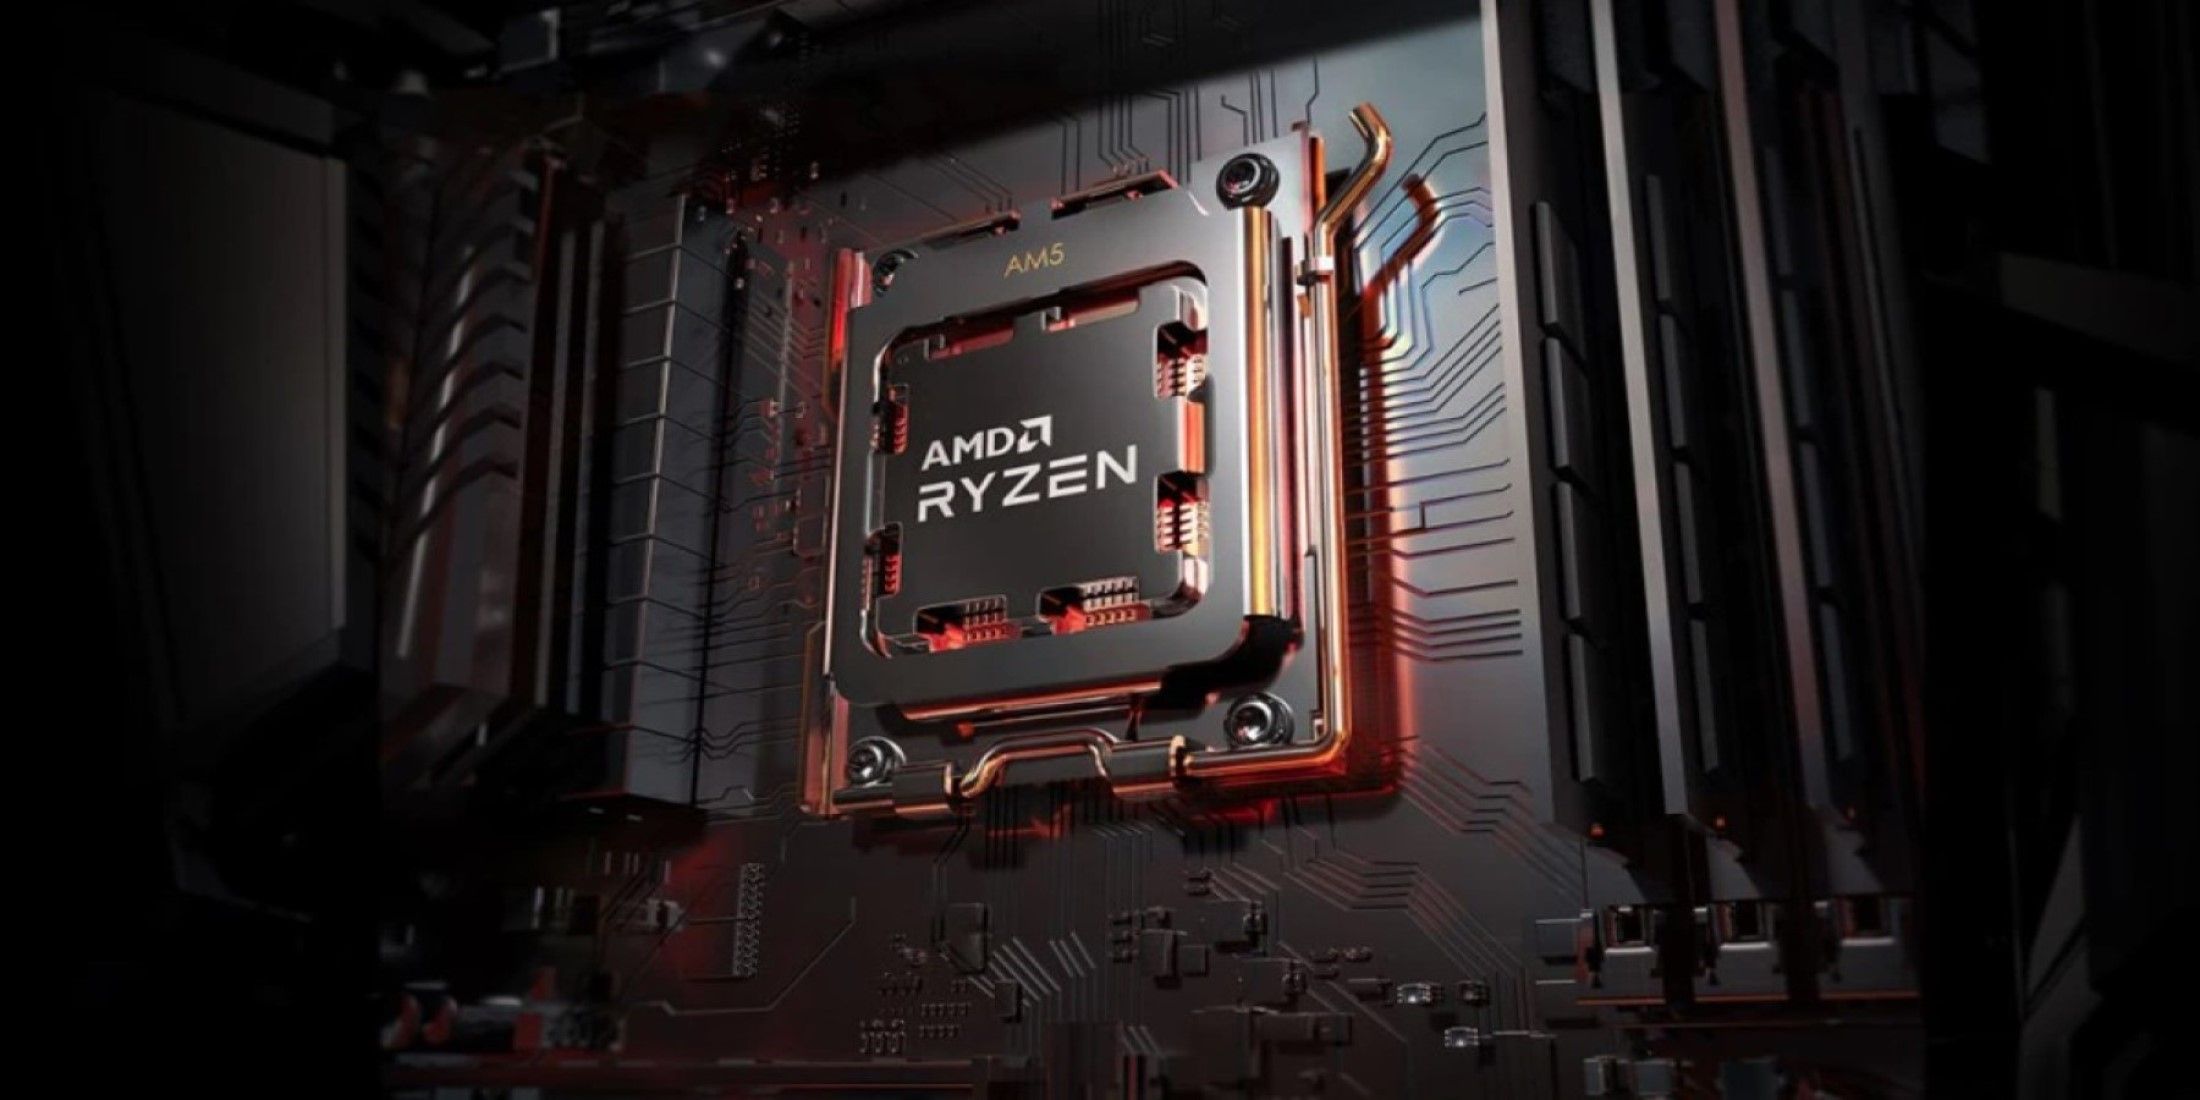 A render of an AM5 socket motherboard and AMD Ryzen processor, provided by AMD.